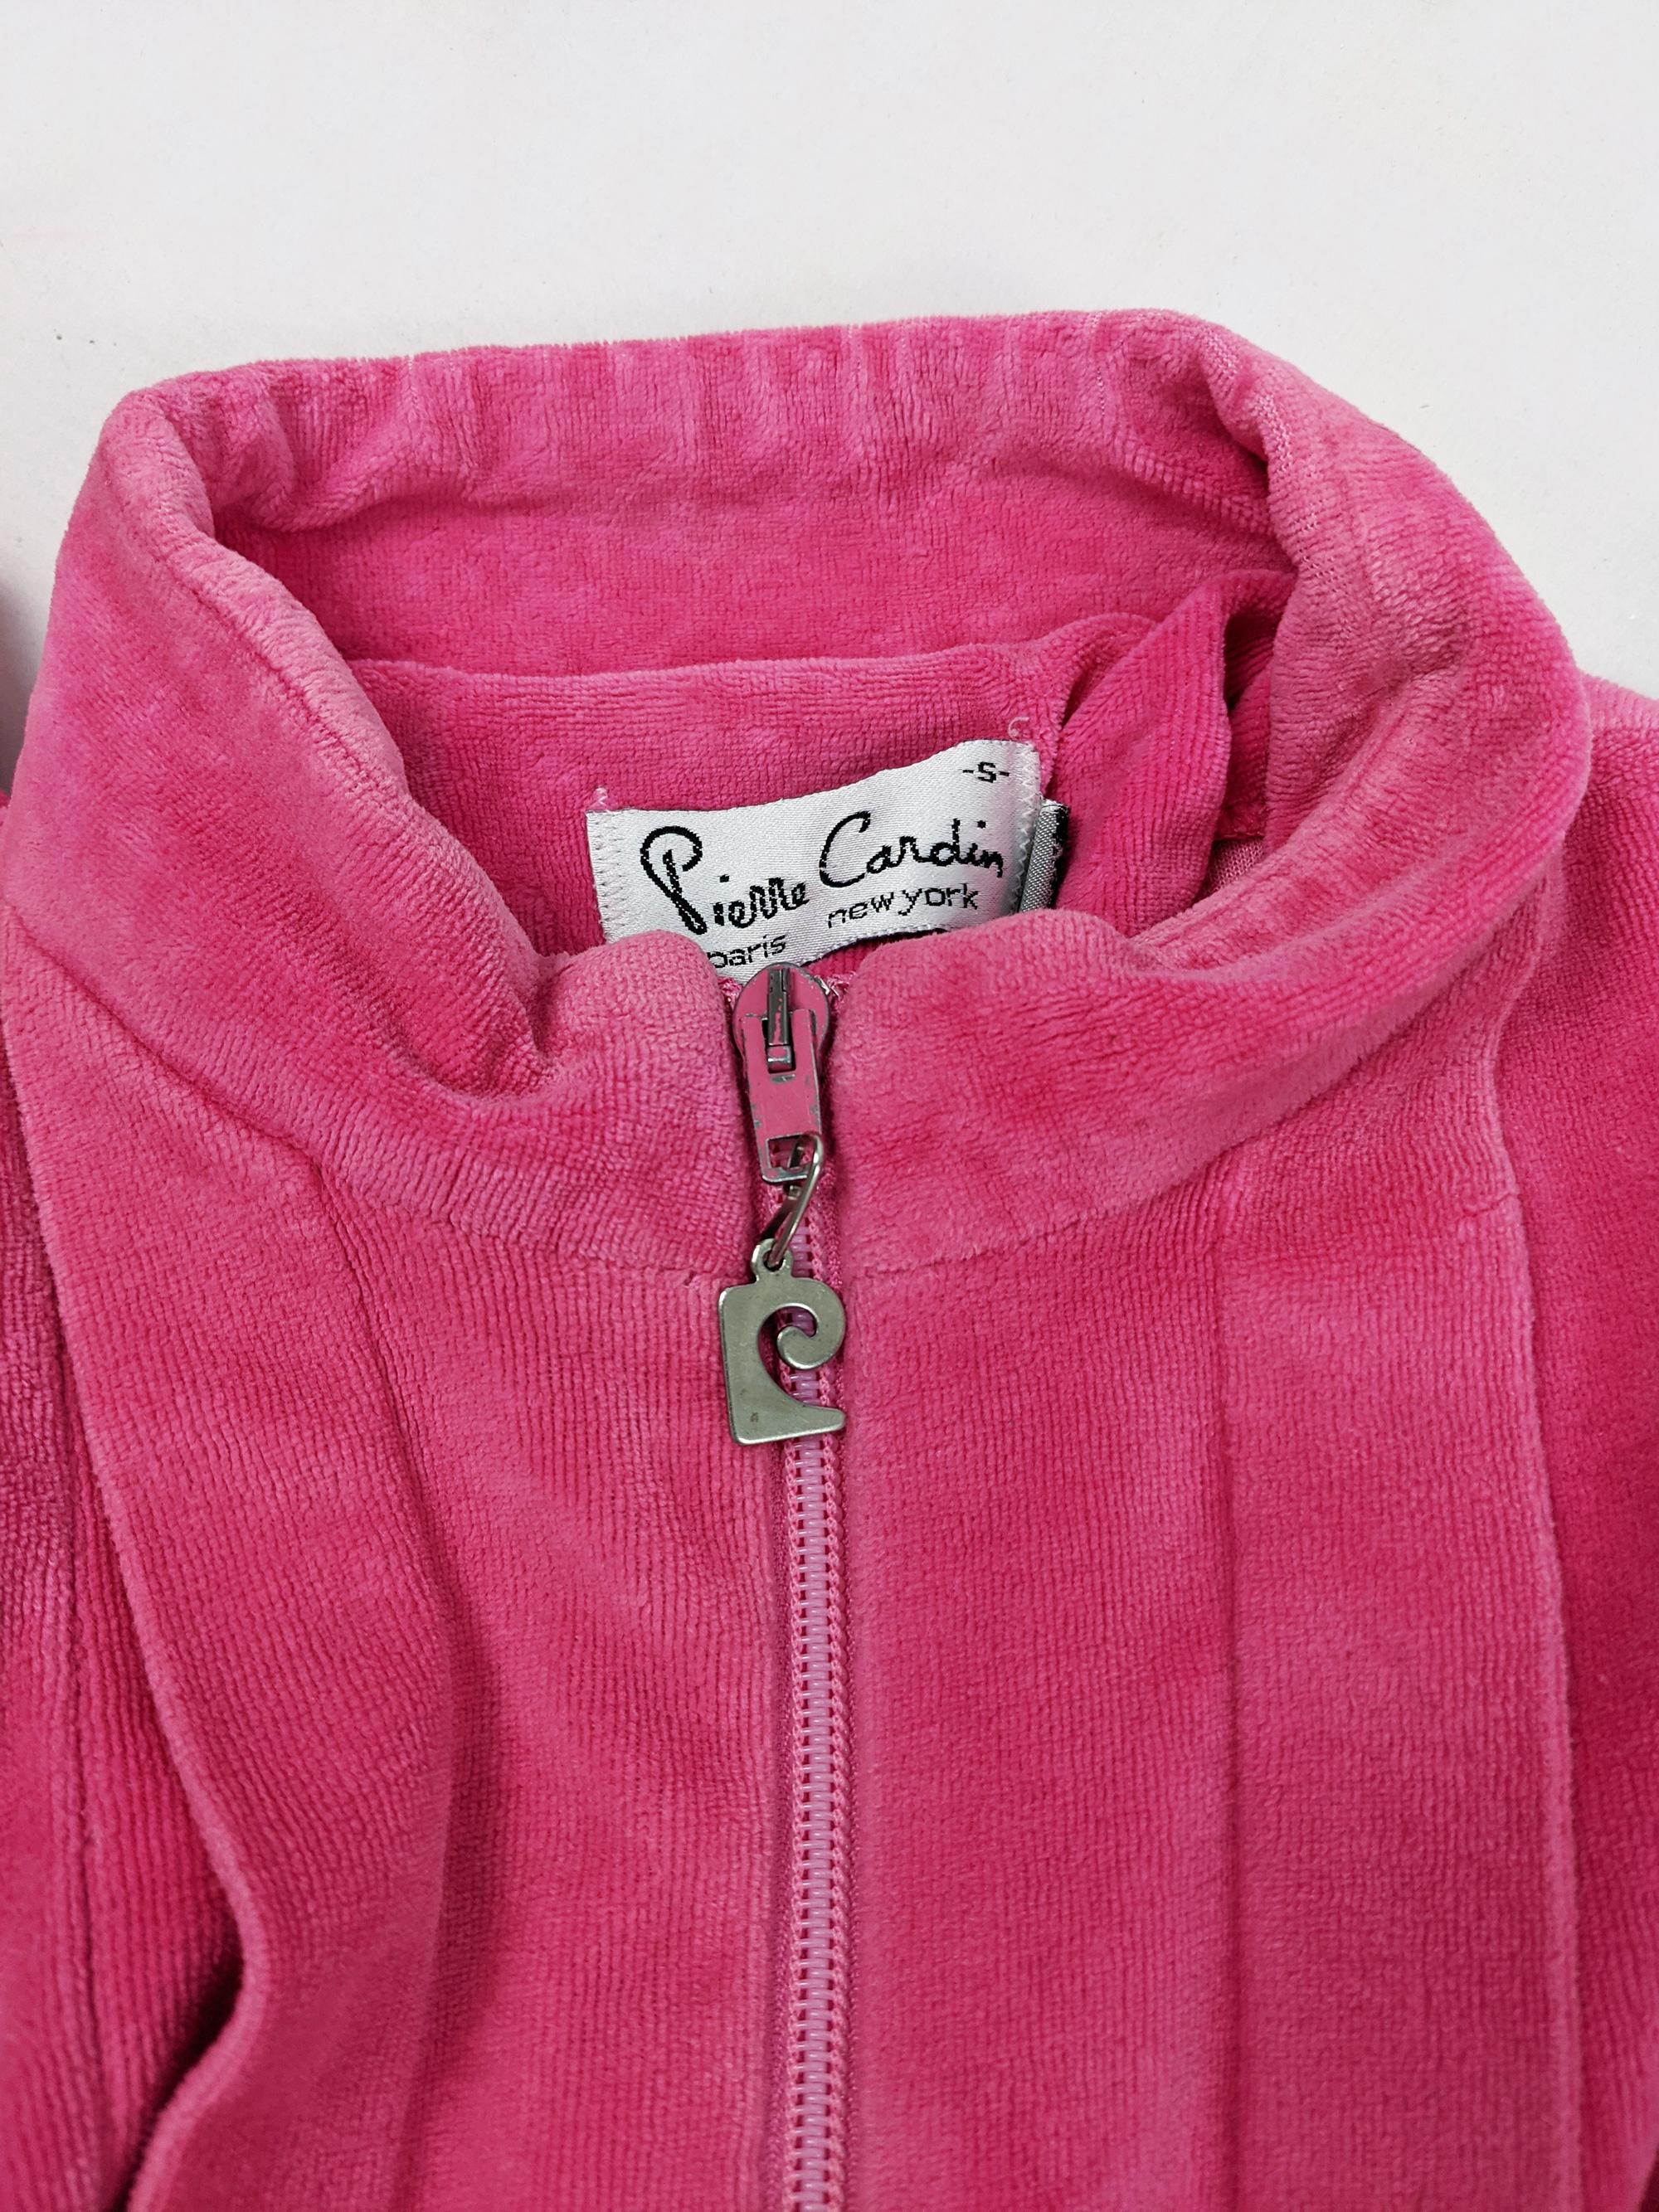 Pierre Cardin Pink Chenille Velour Tracksuit Top Jacket In Good Condition In Doncaster, South Yorkshire